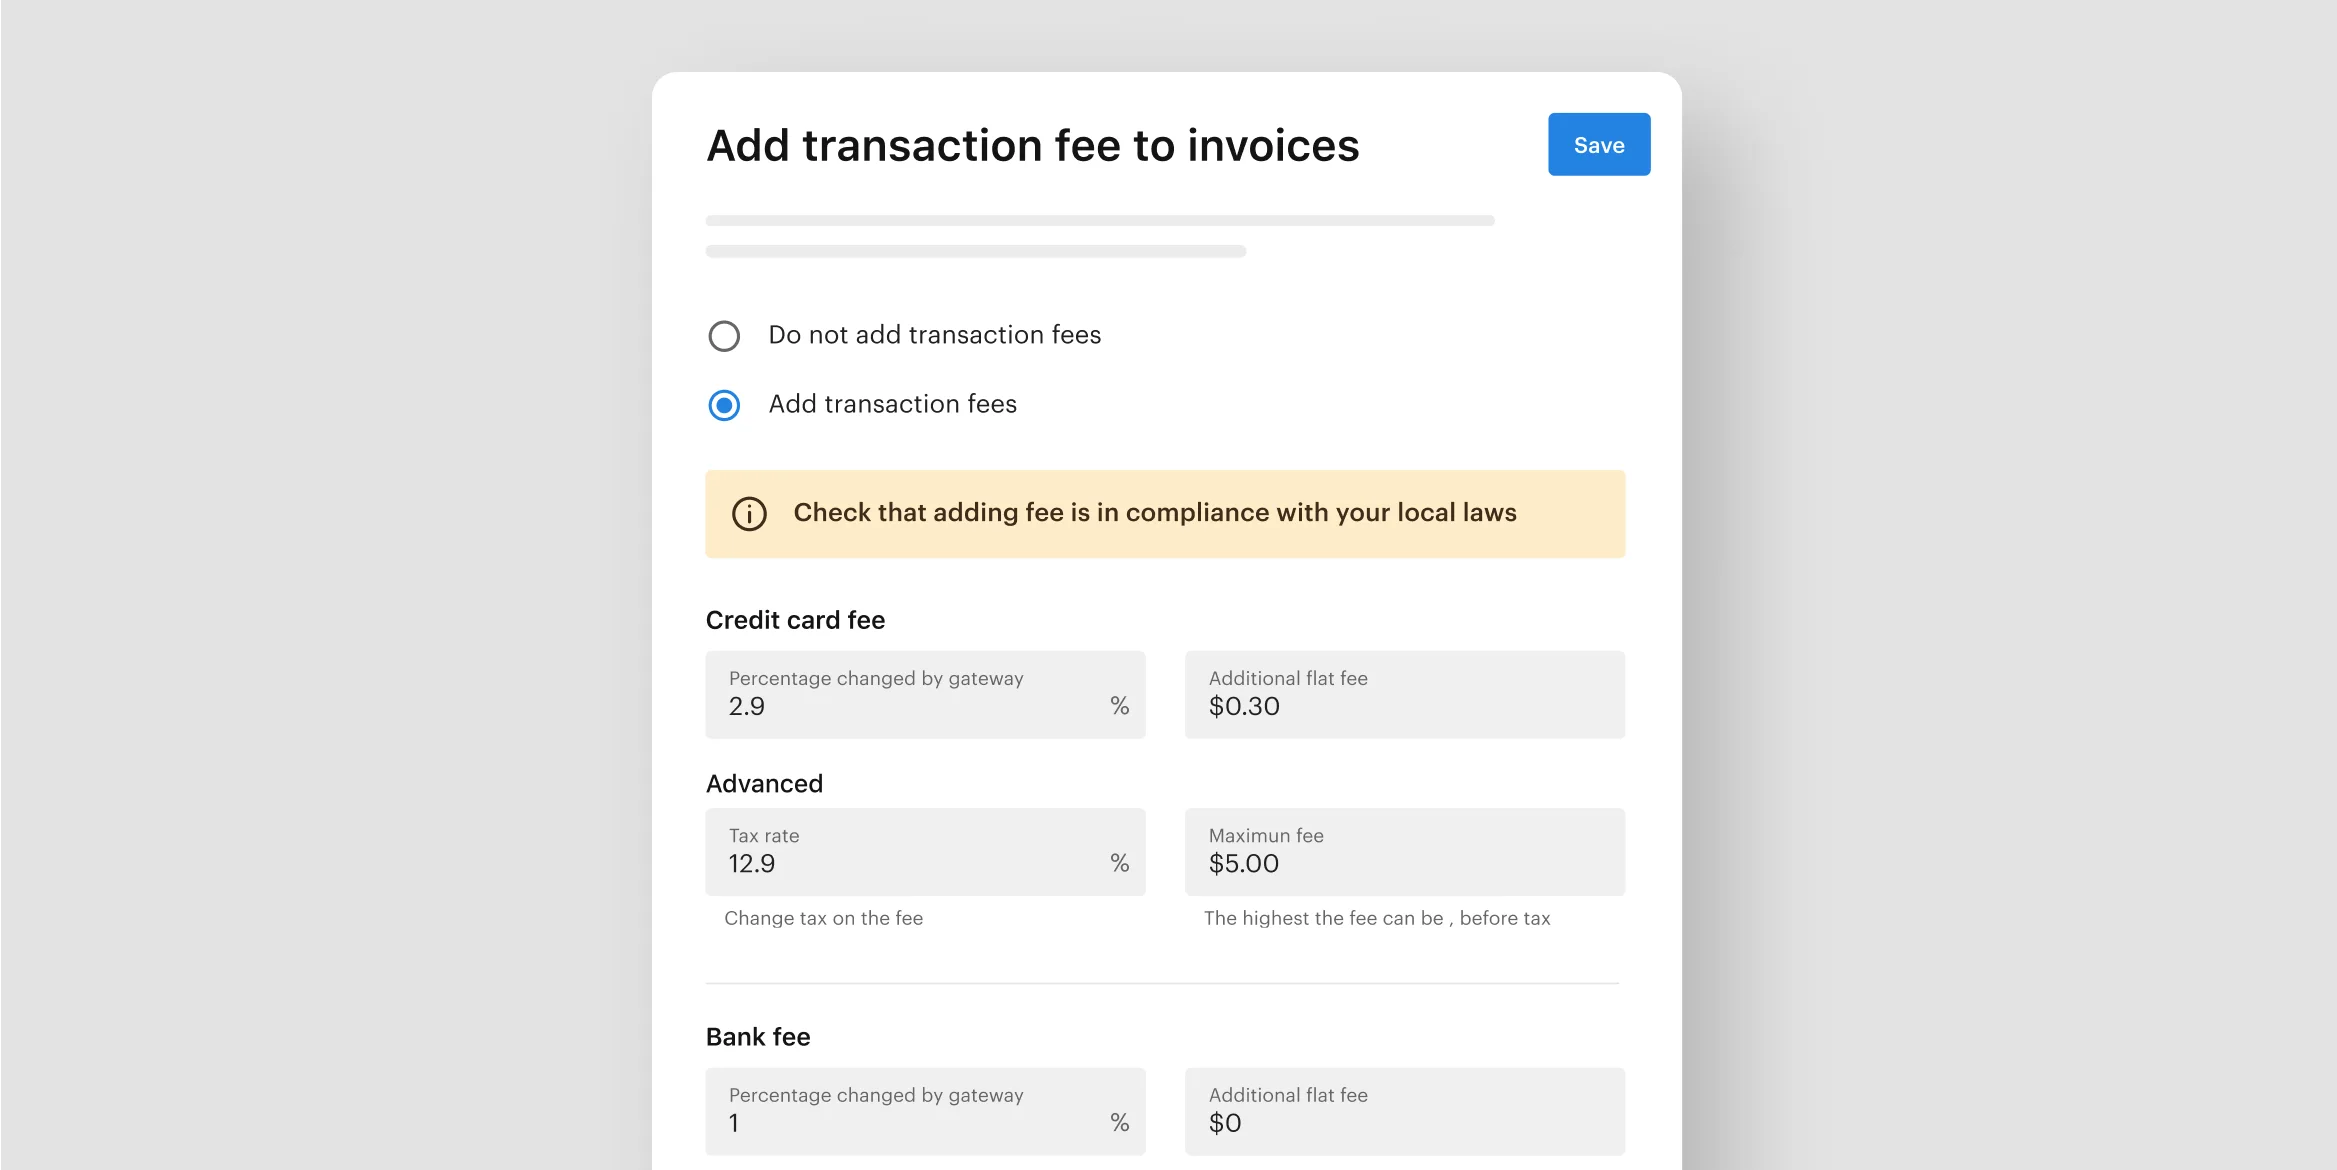 For admins - Add transaction fees to your users’ invoices